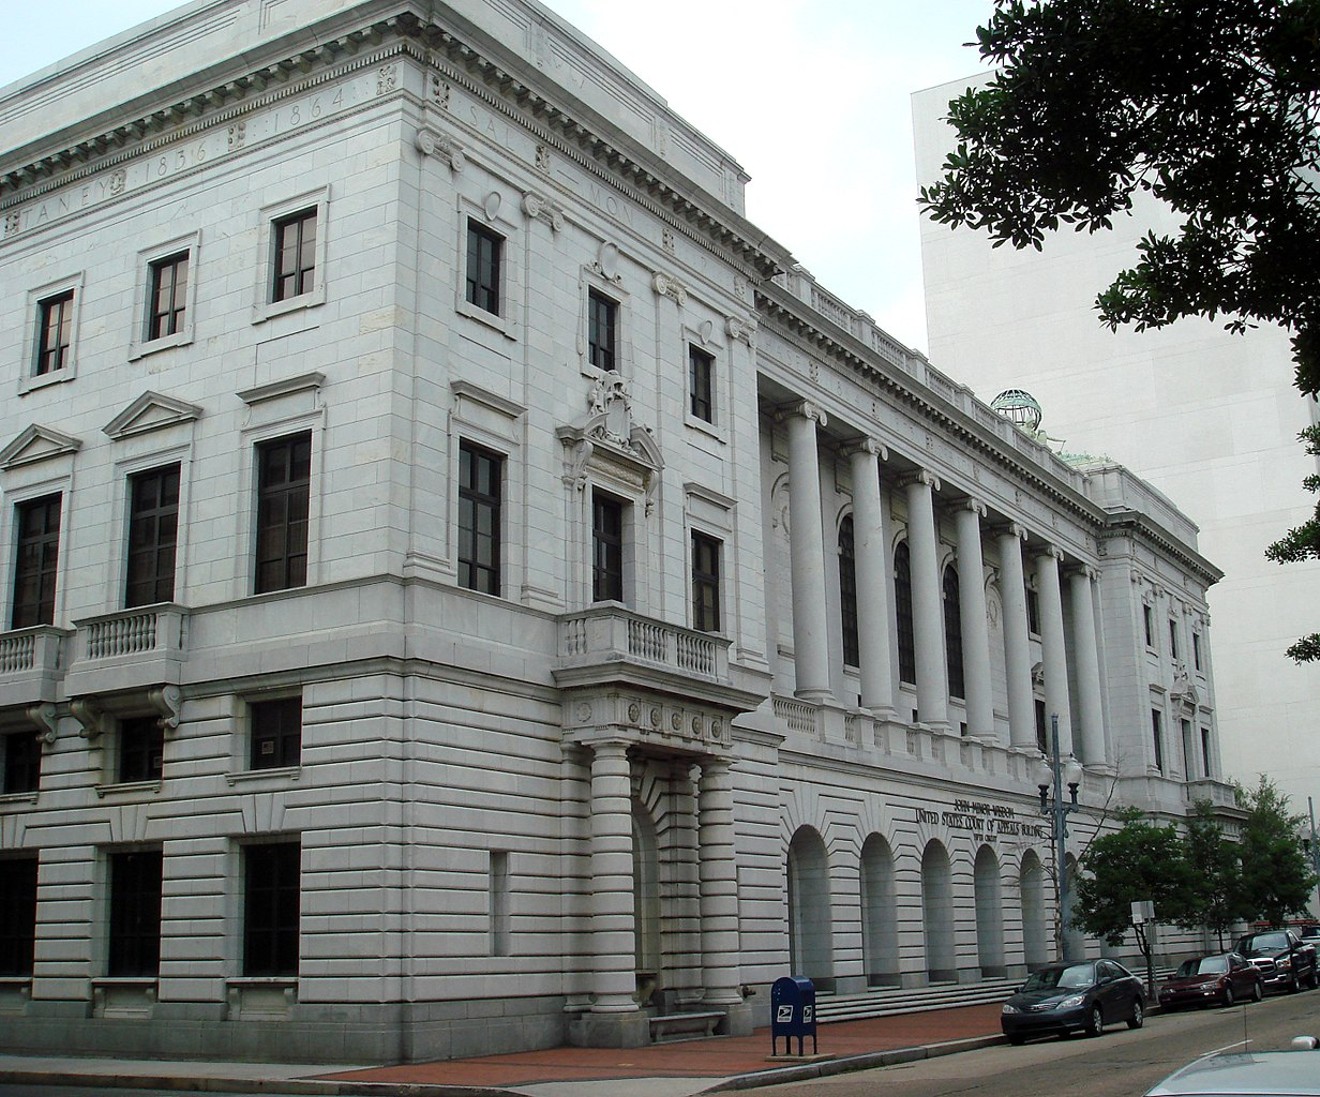 The John Minor Wisdom U.S. Courthouse is home to the 5th U.S. Circuit Court of Appeals in New Orleans.